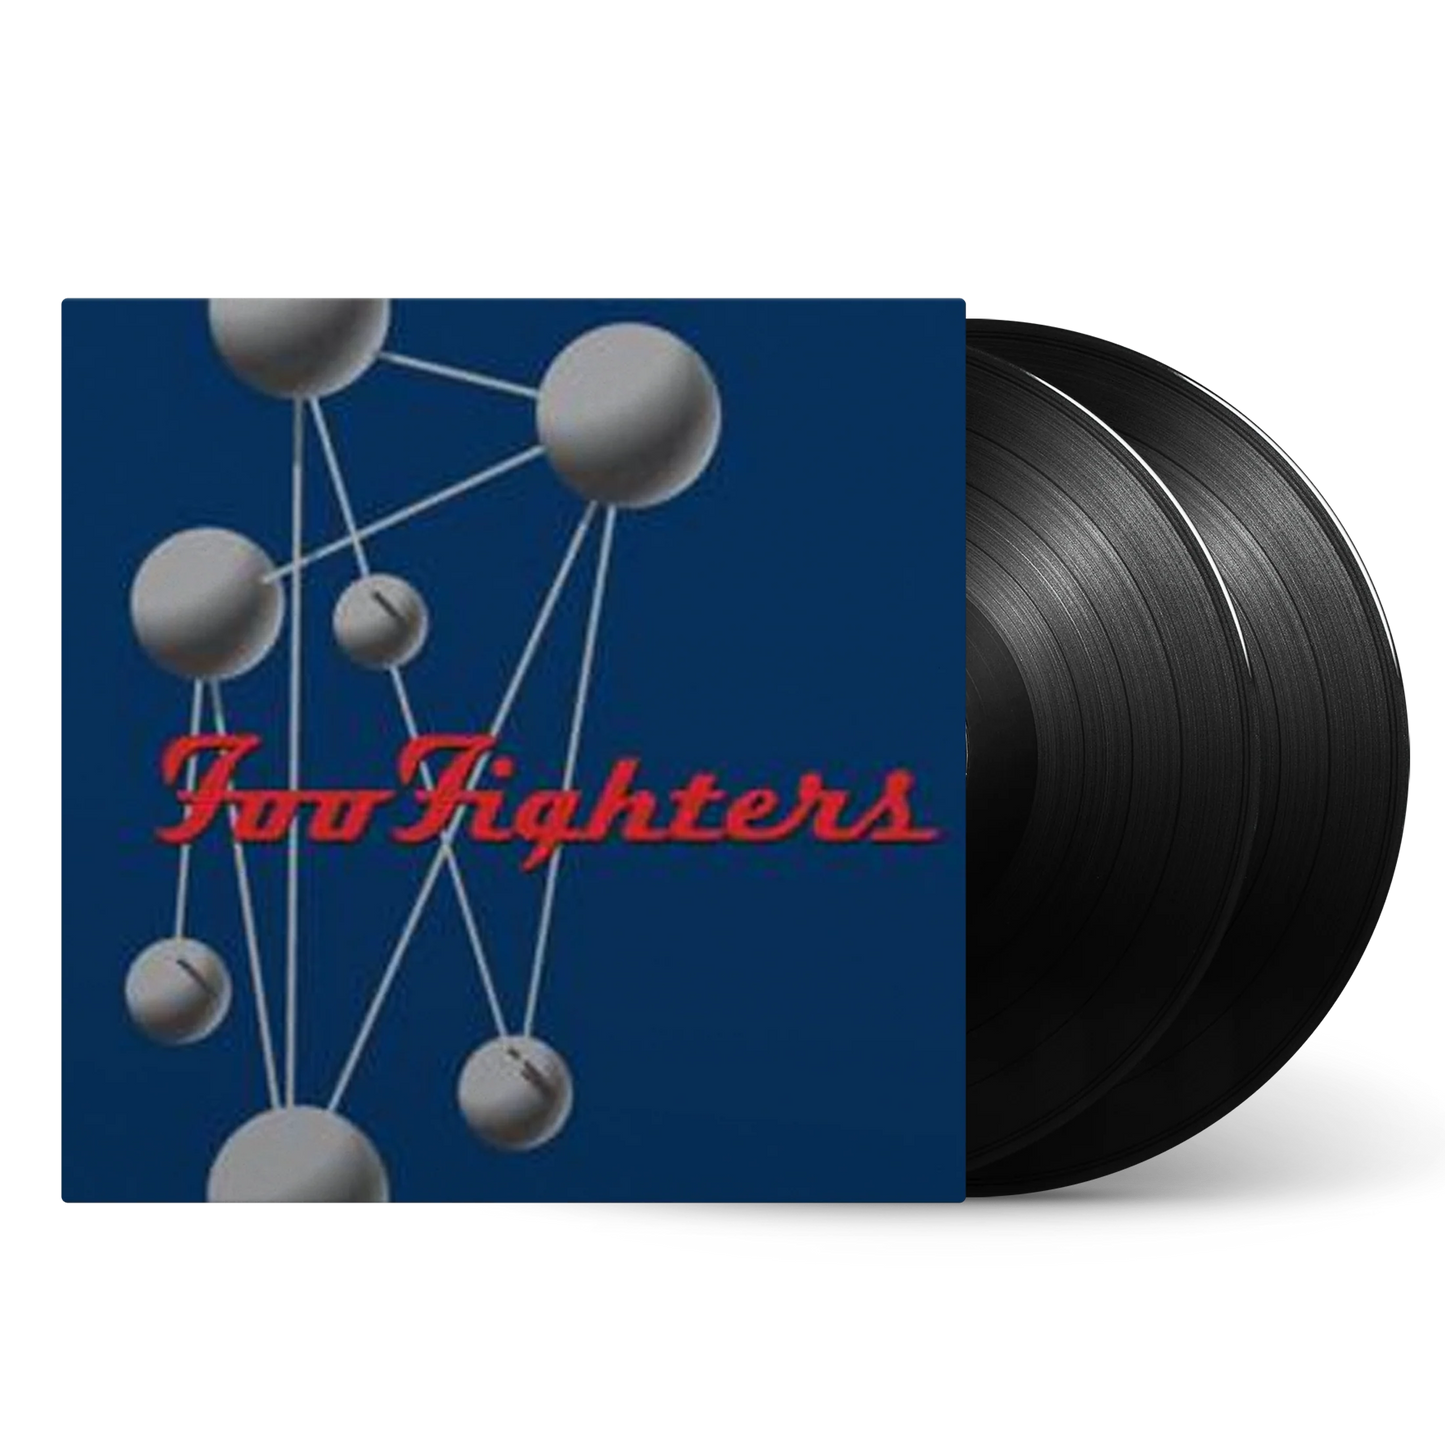 Foo Fighters: The Colour And The Shape (180g) 2 lps